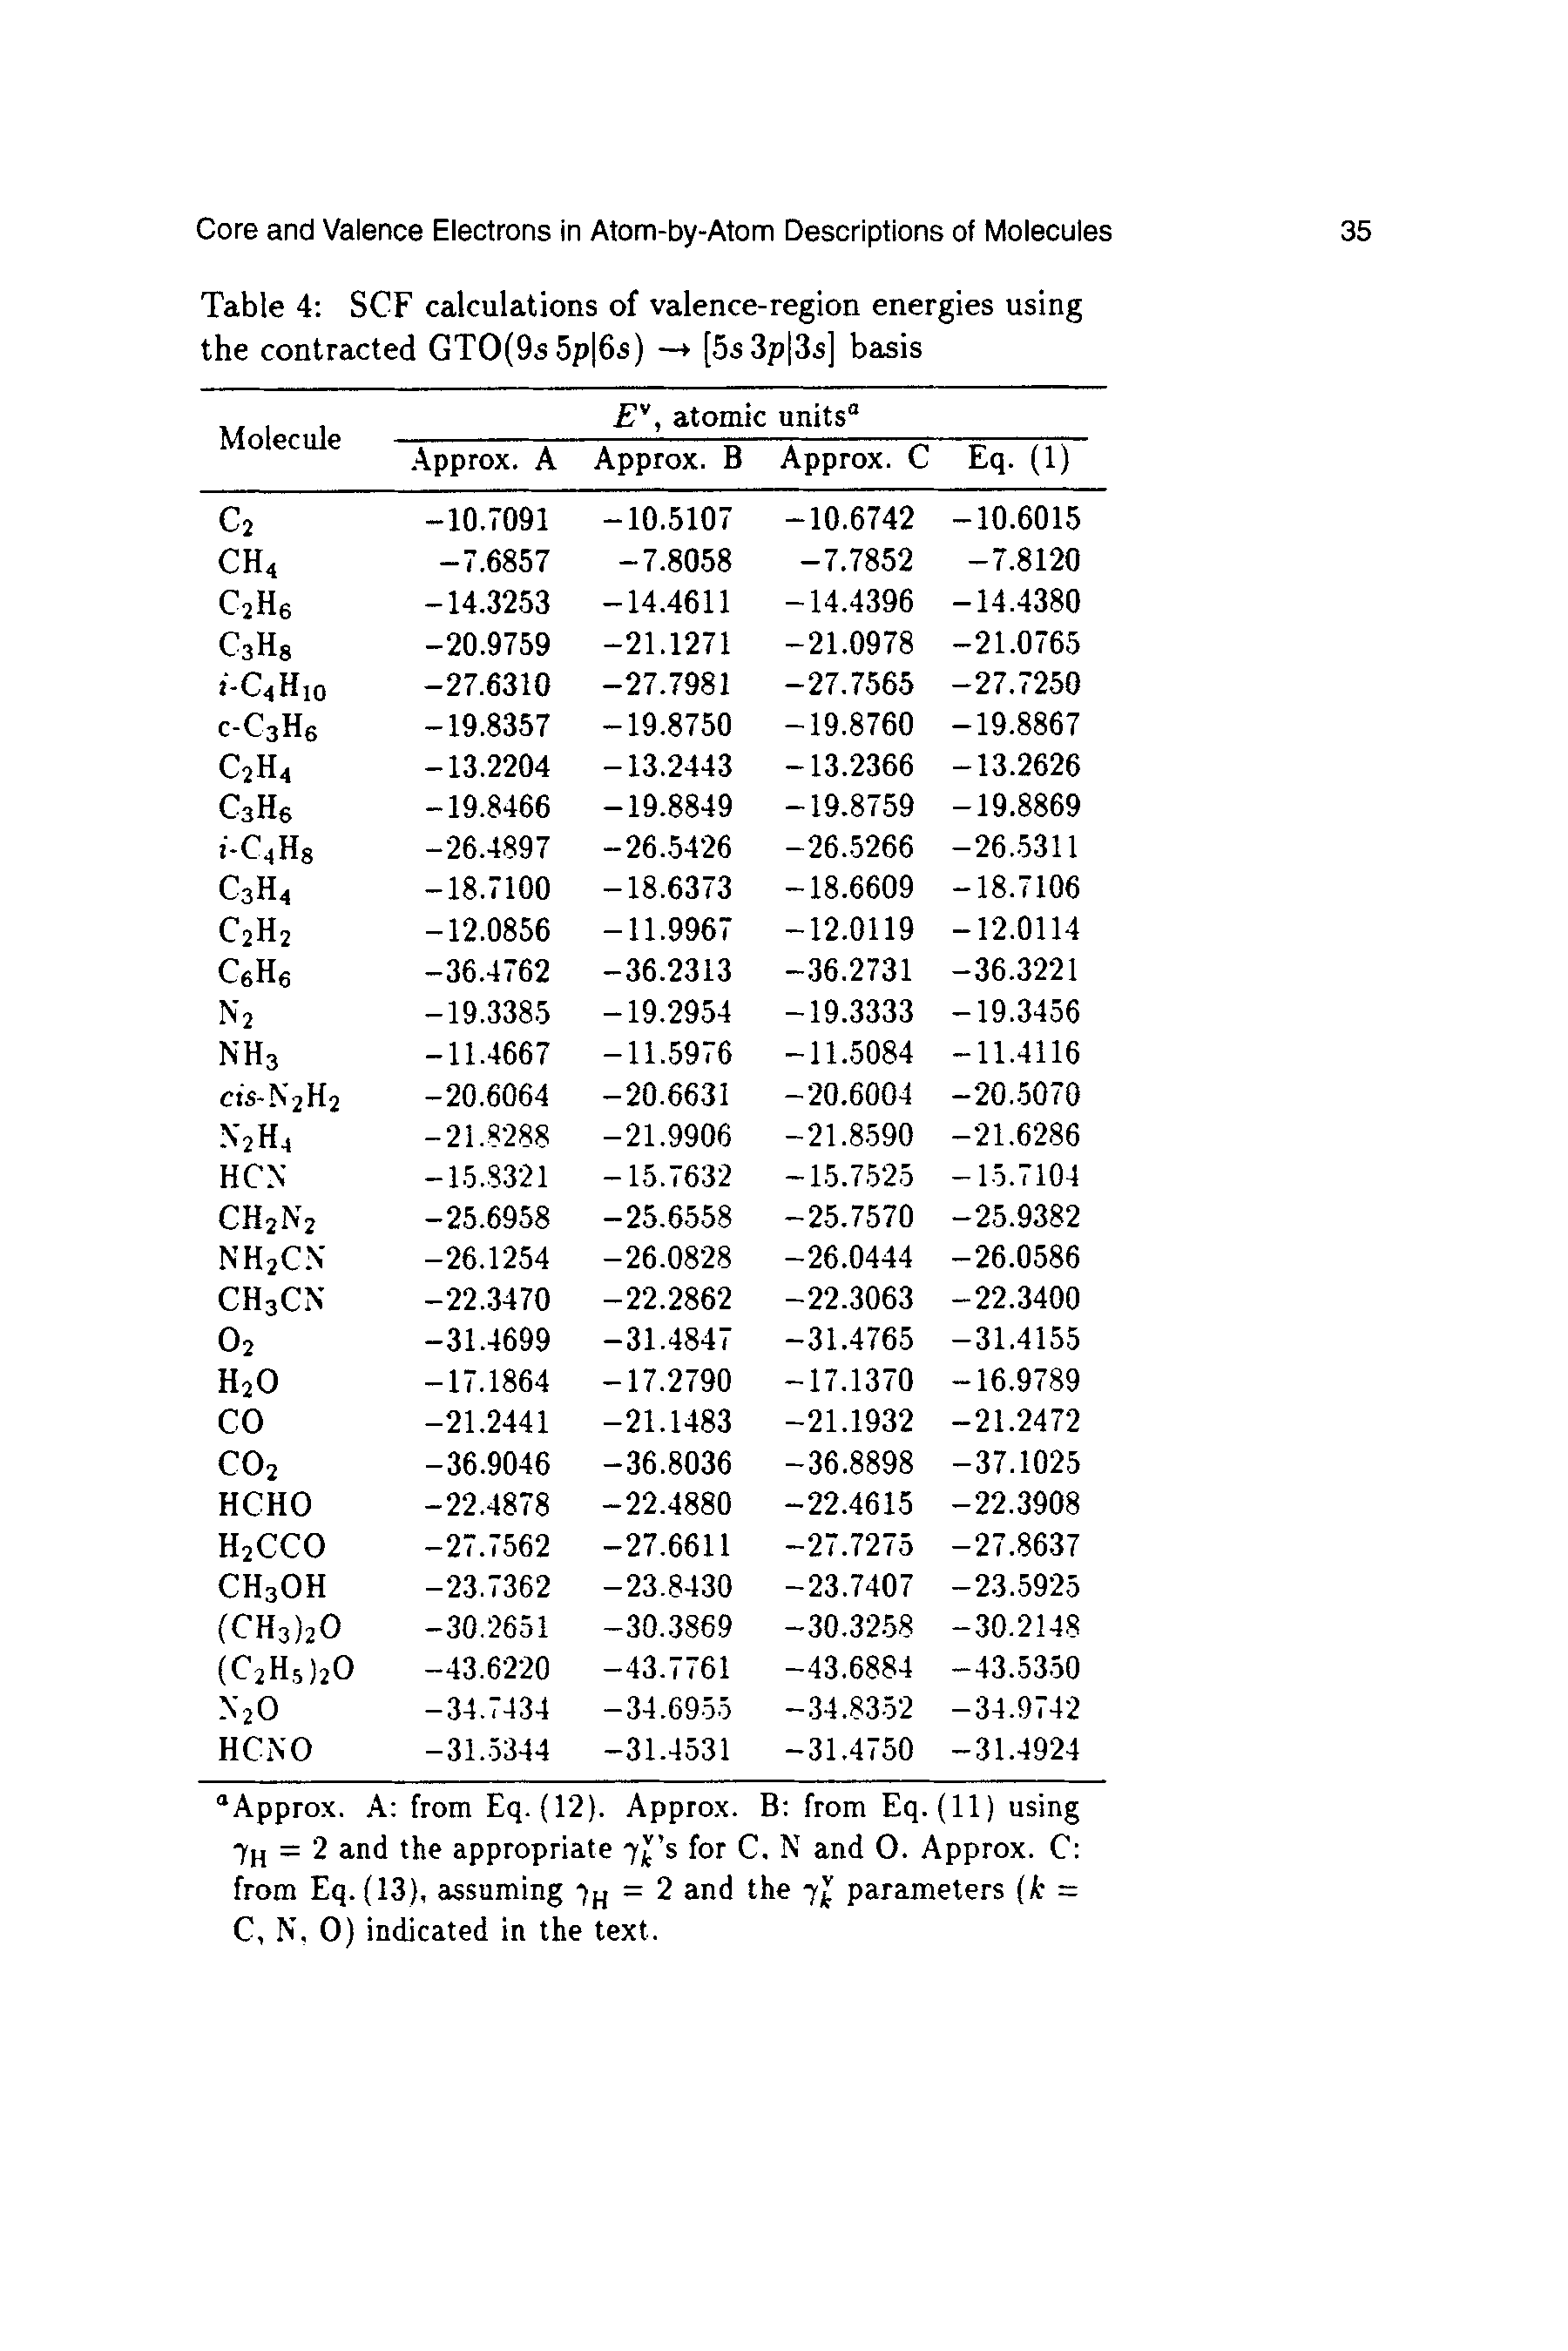 Table 4 SCF calculations of valence-region energies using the contracted GTO(9s5p 6s) —+ [5s3p 3s] basis...